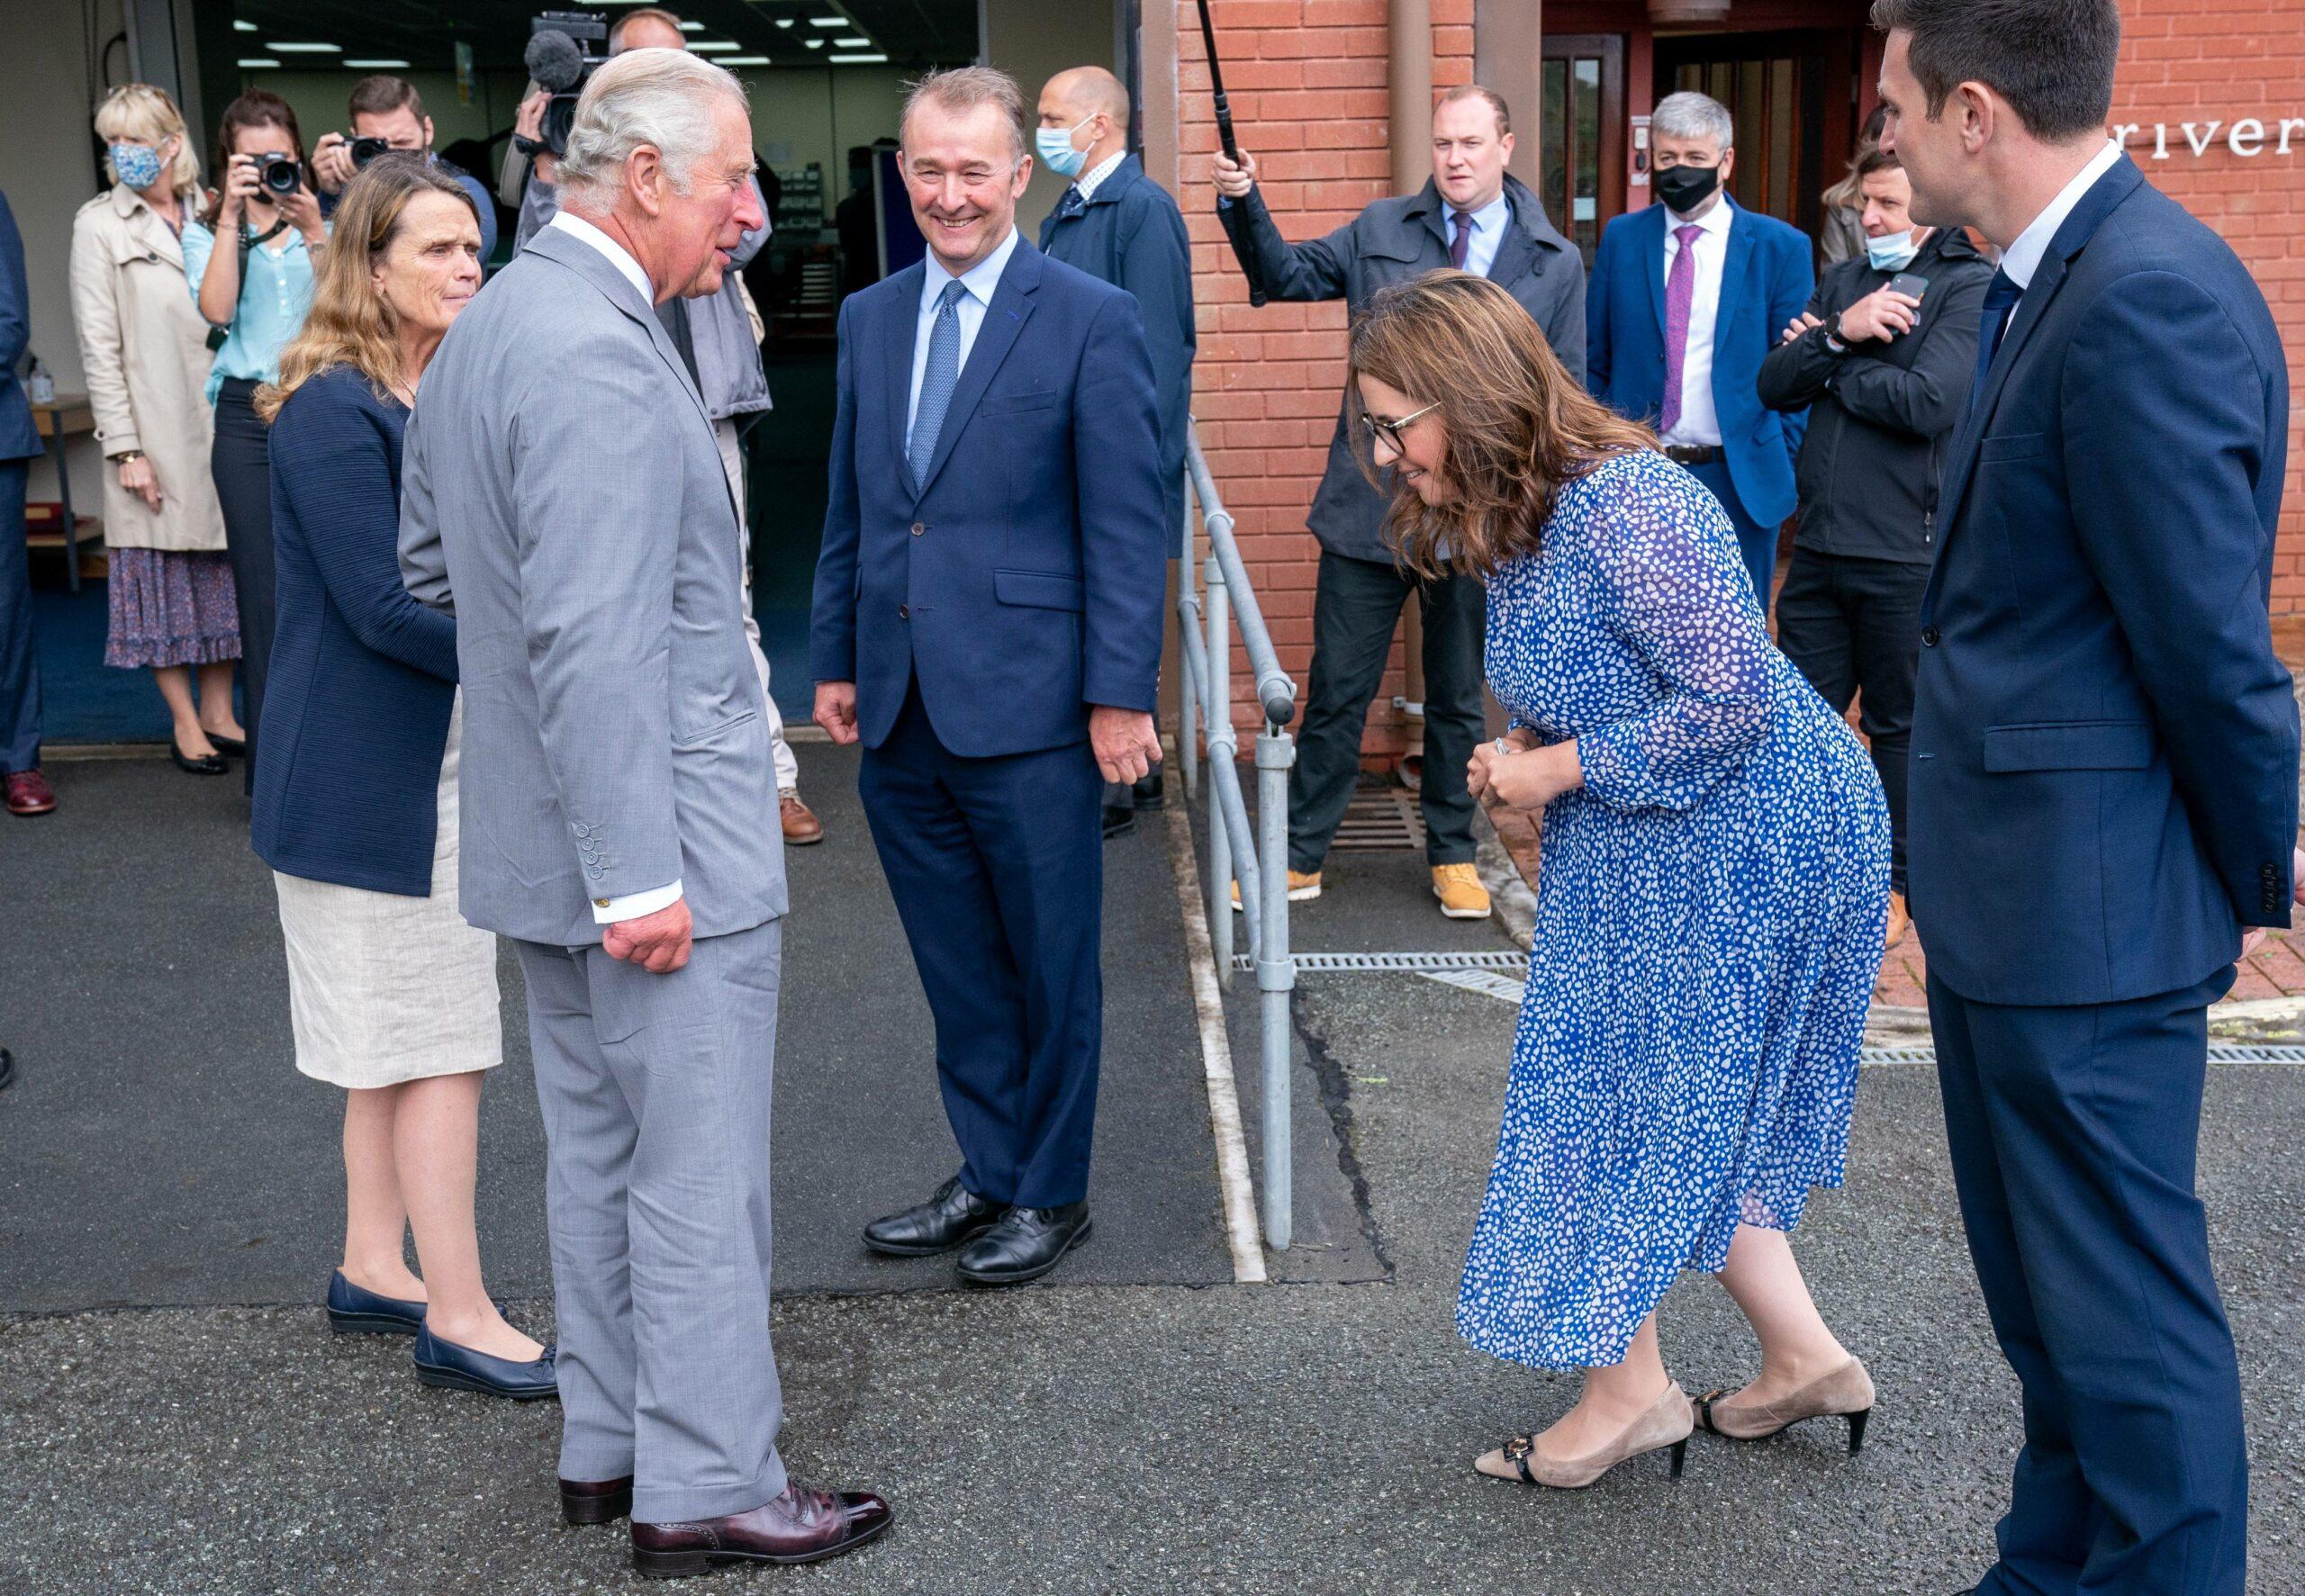 The Prince of Wales visited Riversimple